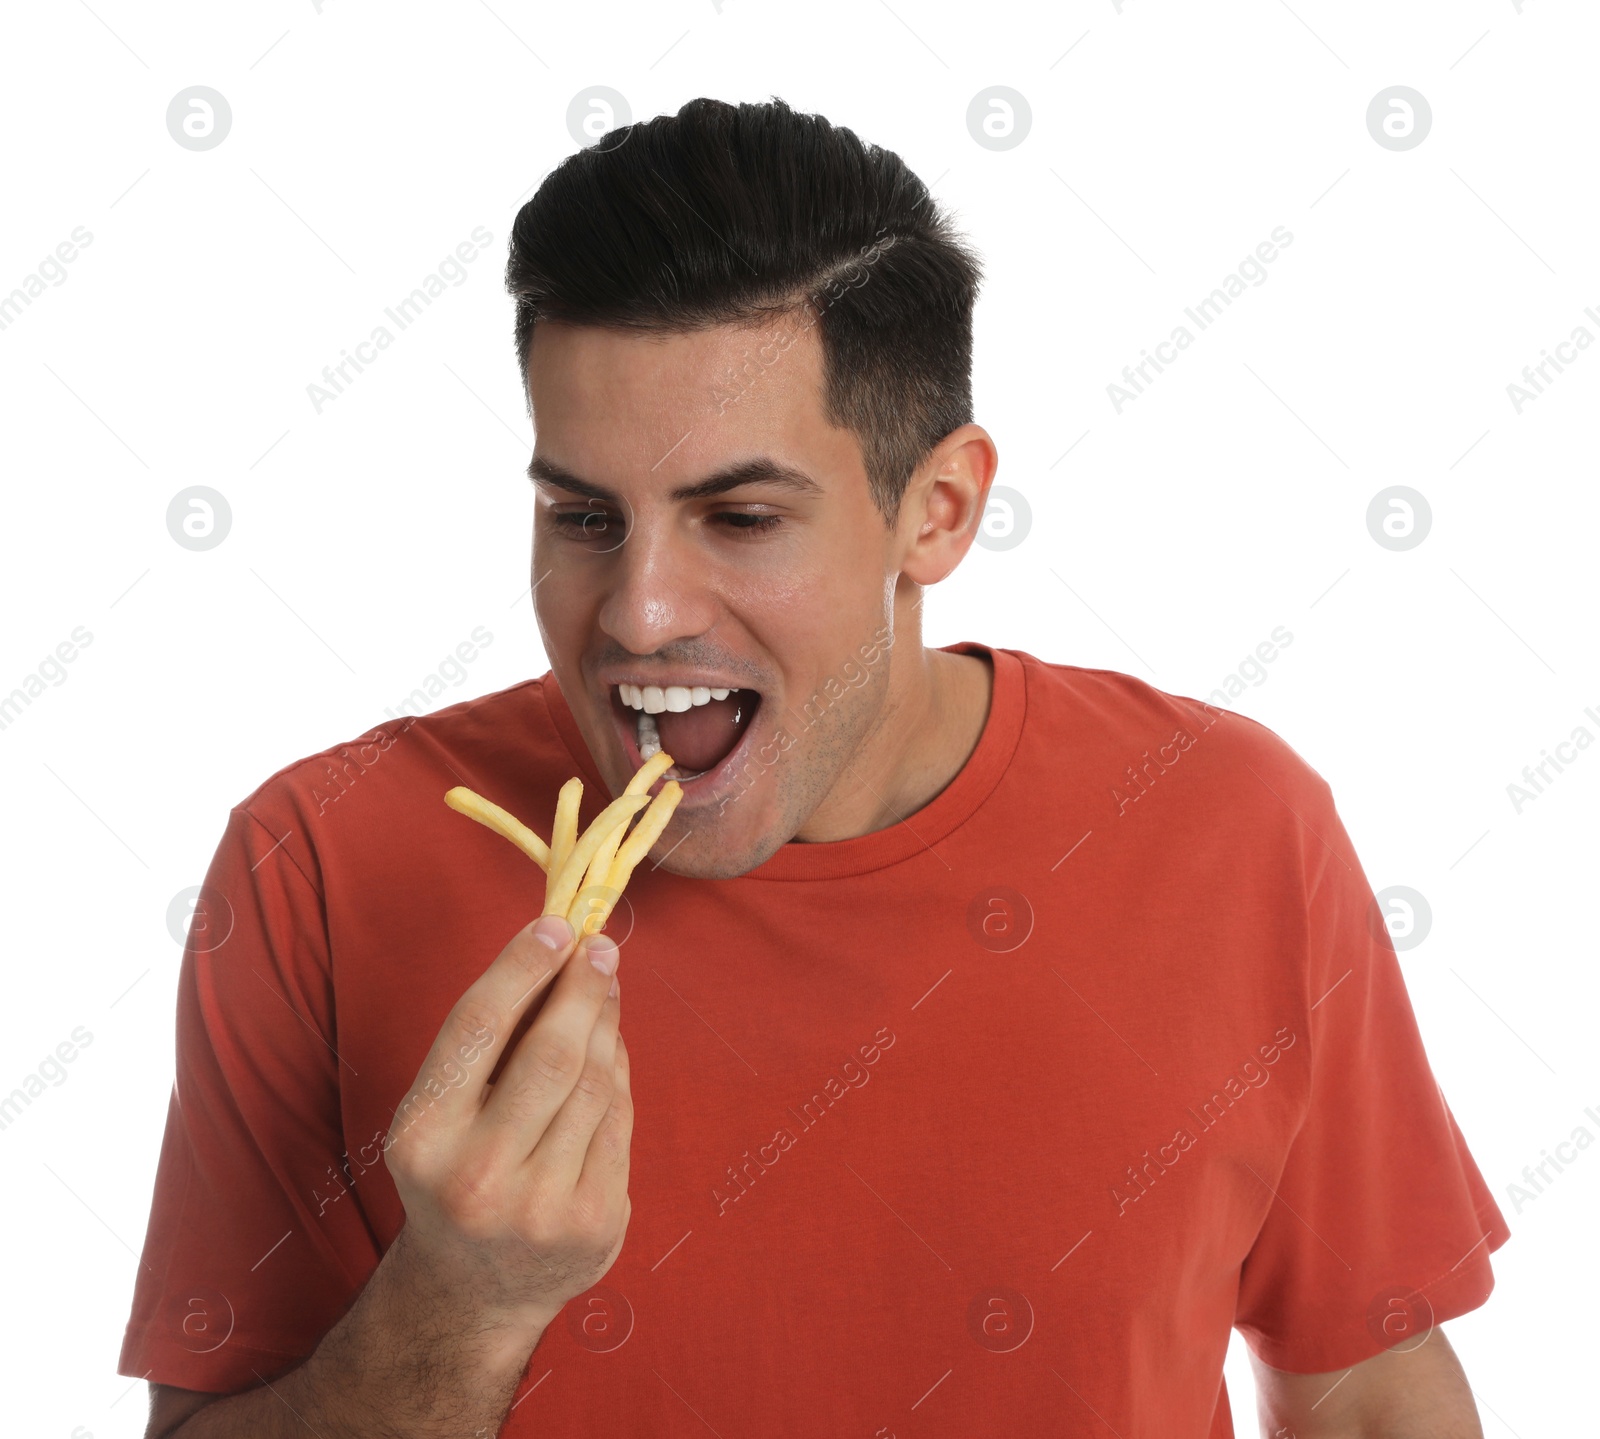 Photo of Man eating French fries on white background